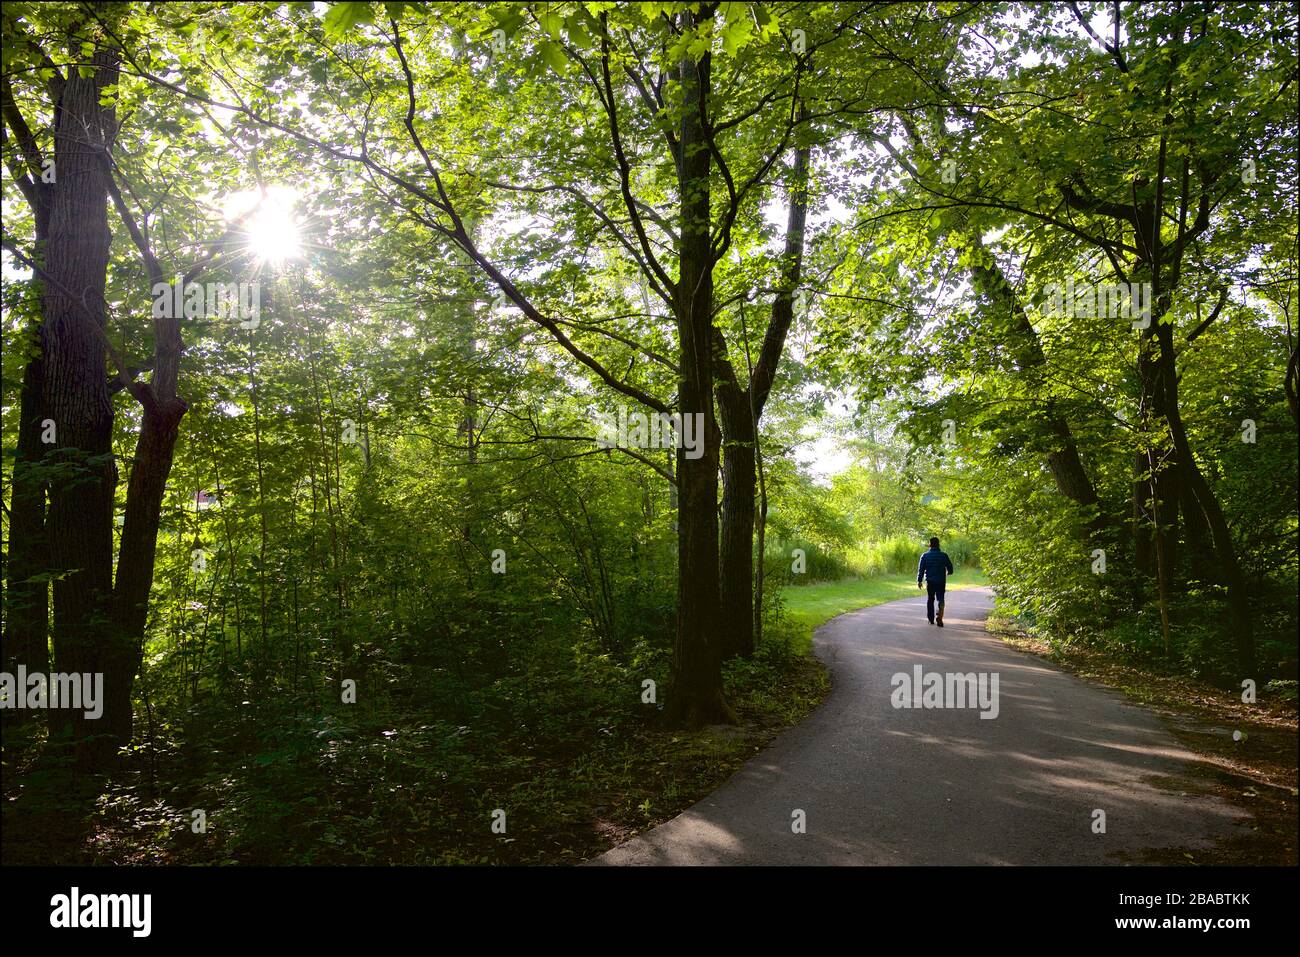 Walking in the public park - a healthy lifestyle Stock Photo